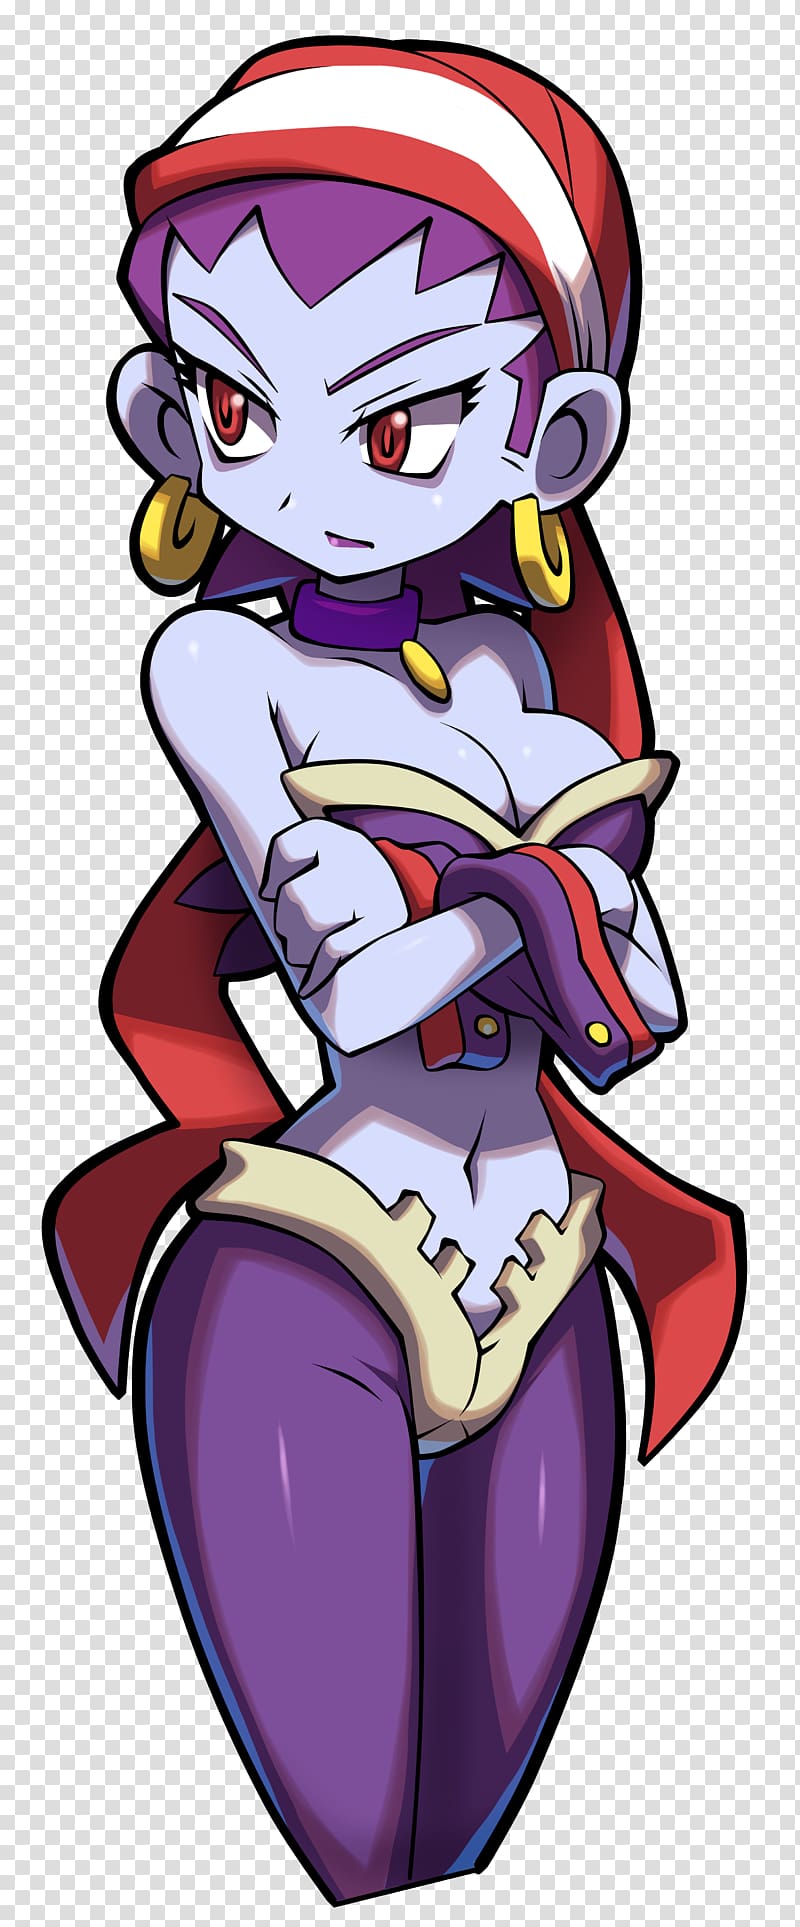 Shantae and the Pirate\'s Curse Wii U Nintendo 3DS Illustration North America, shantae transparent background PNG clipart